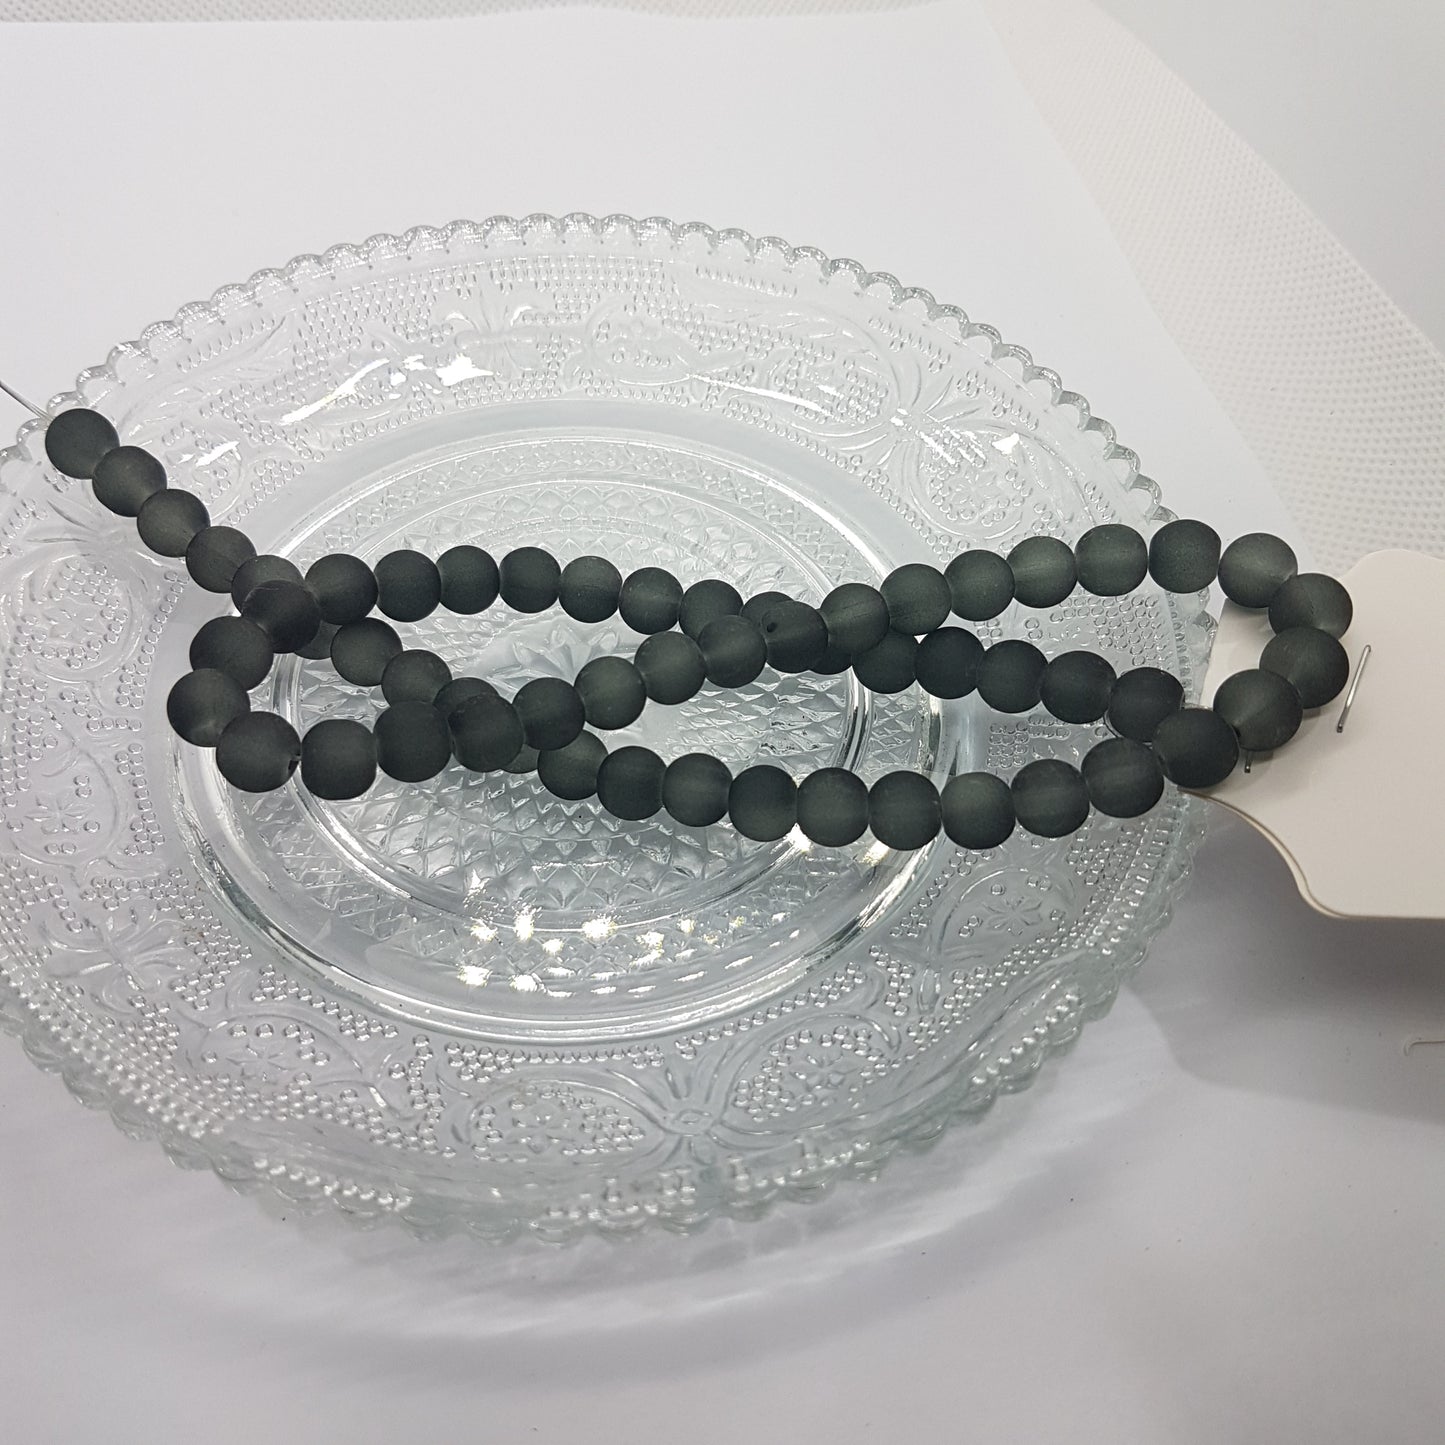 8mm Black Frosted Glass Beads